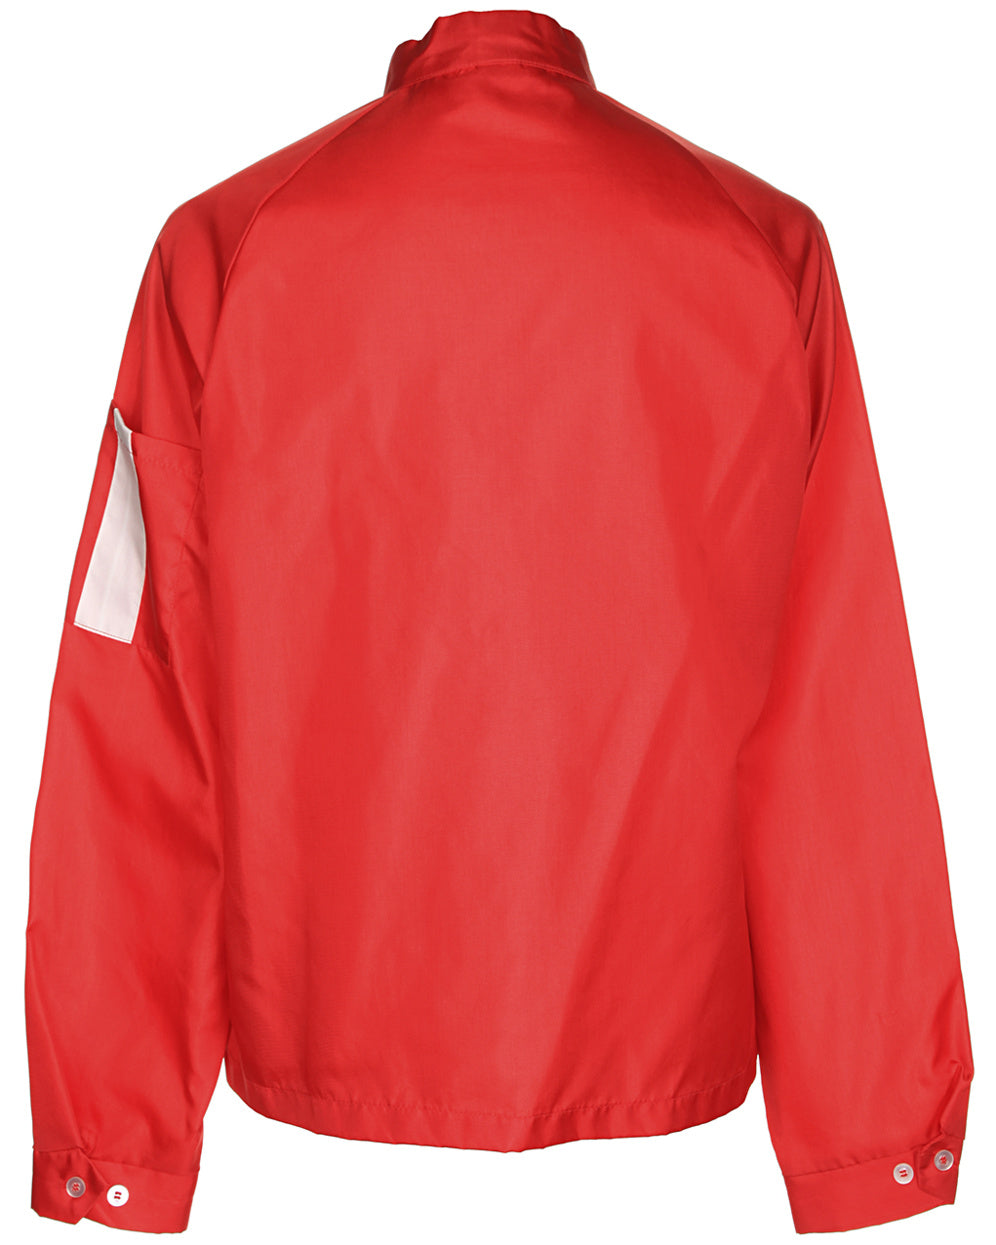 80s Red & White Swingster Sports Jacket - L